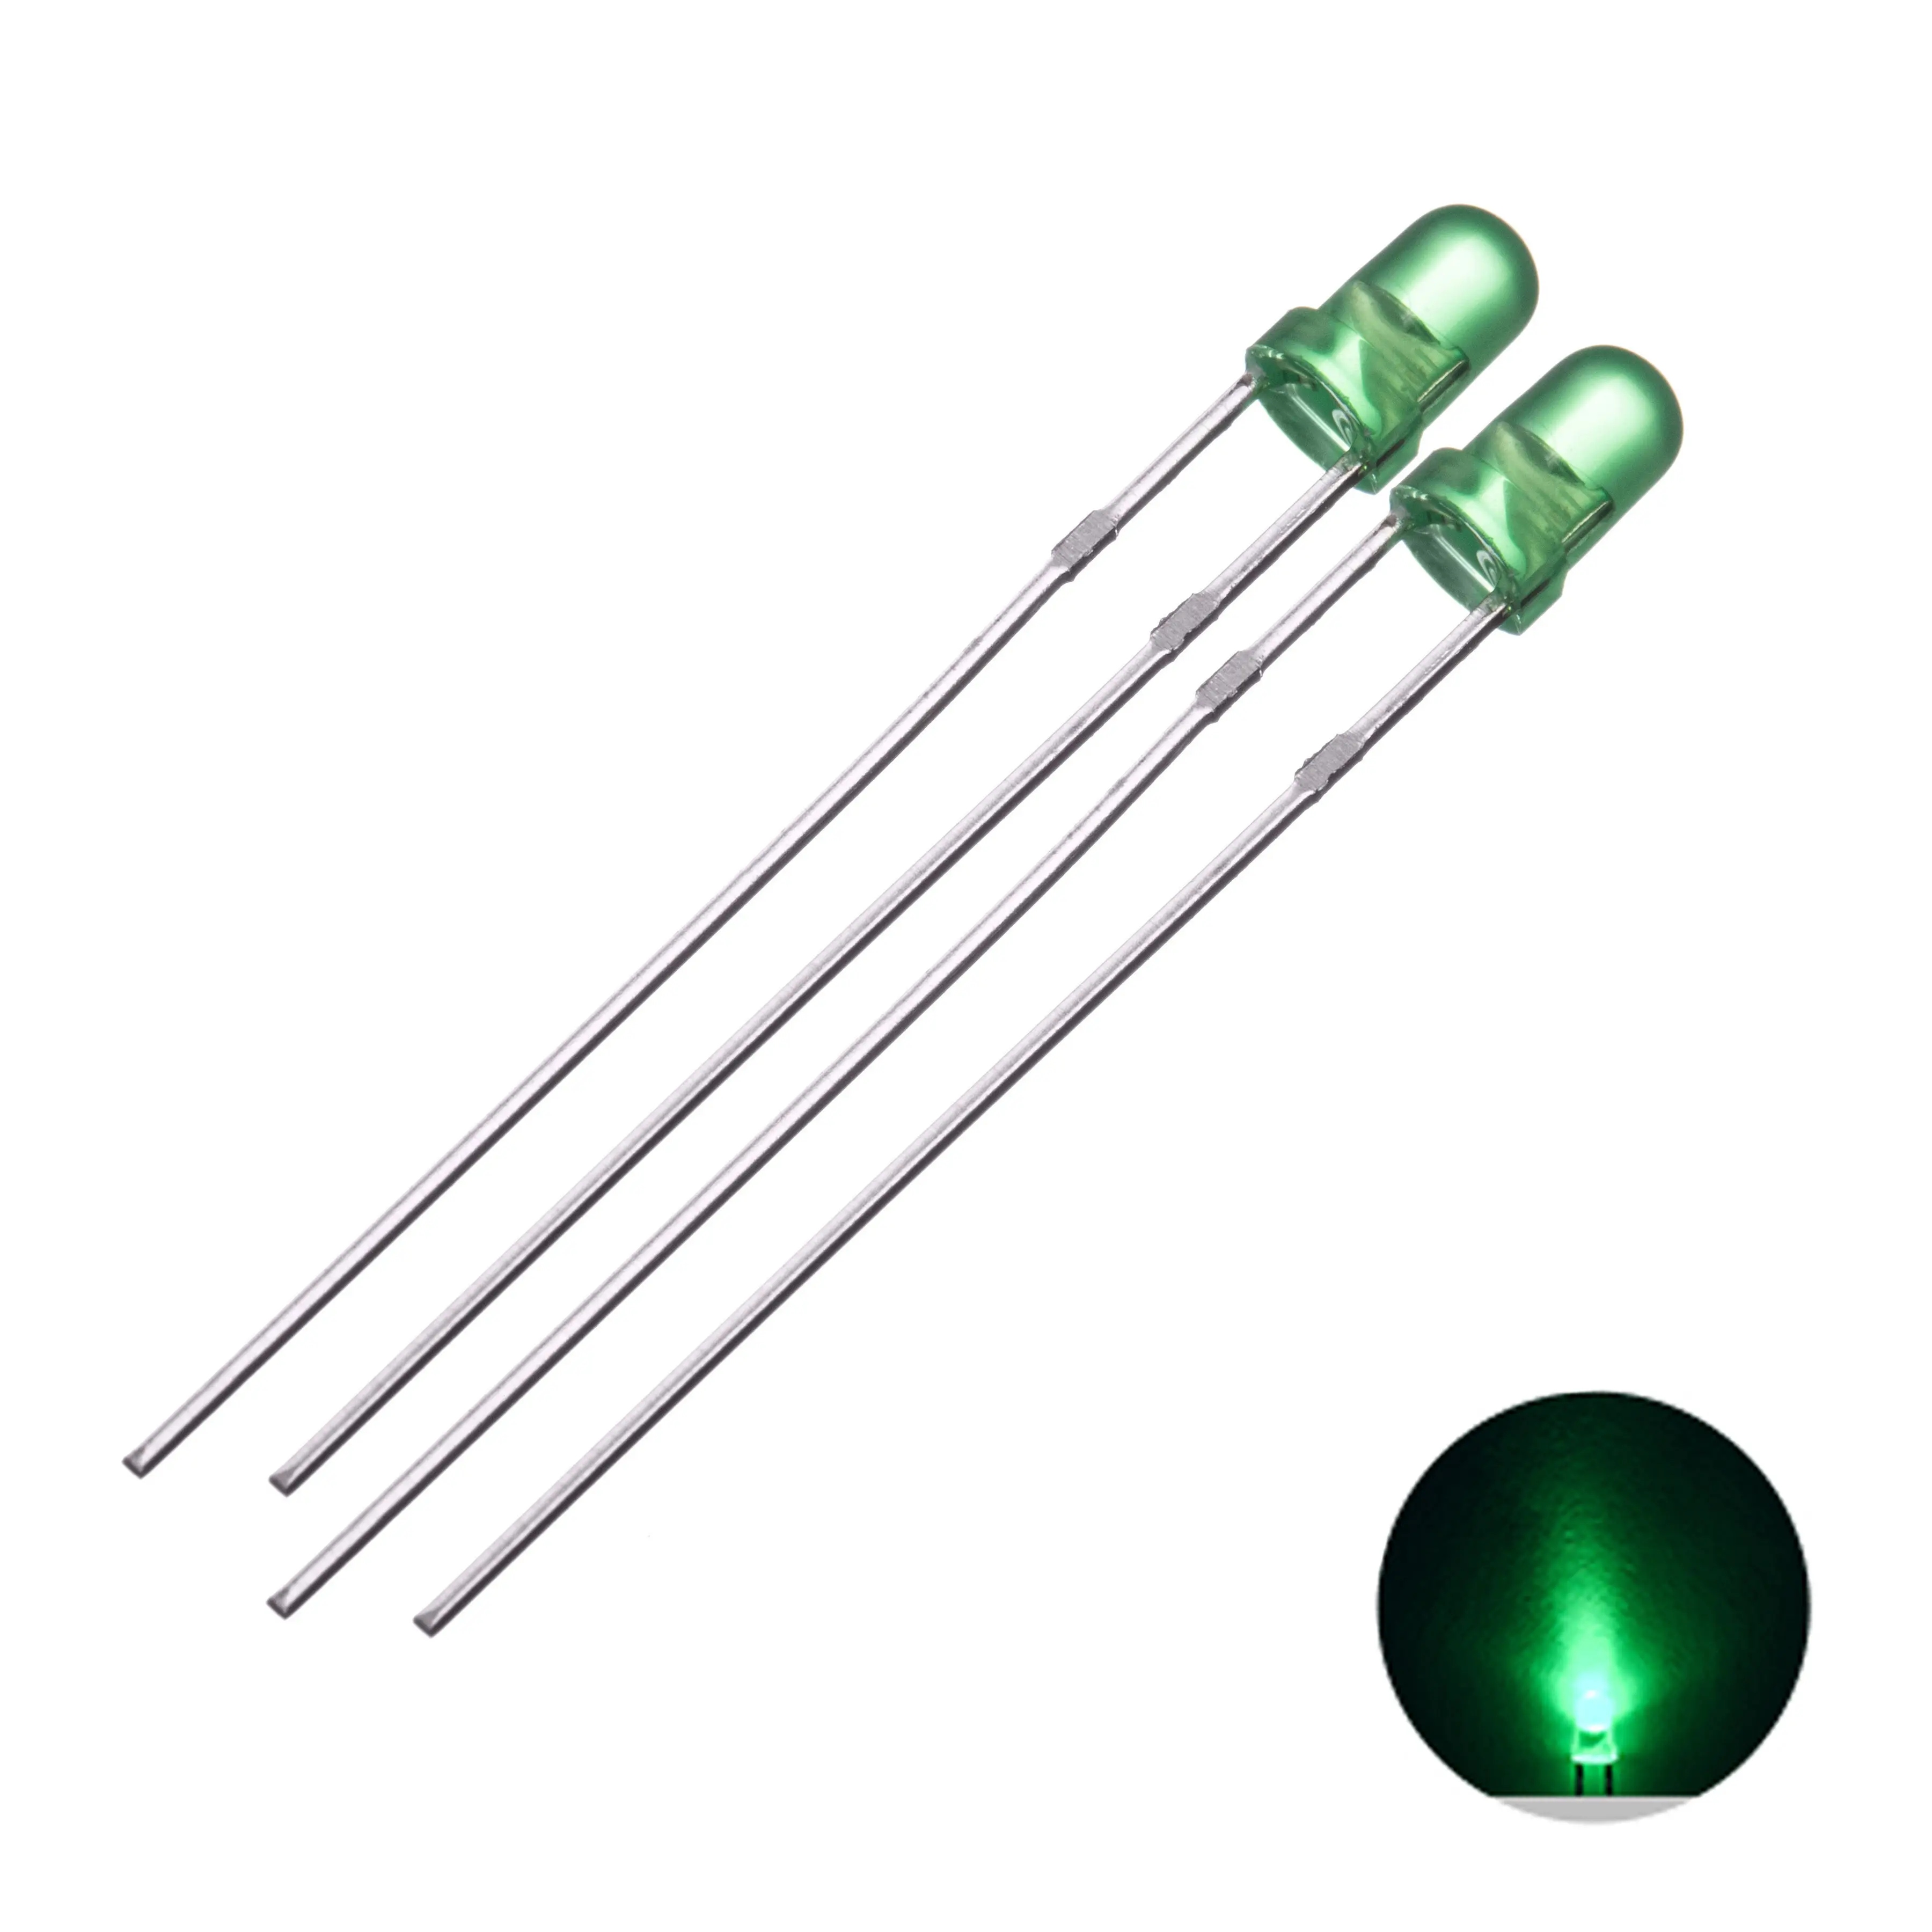 In Stock Through Hole Led Lighting Diode Dip 5Mm Light 3Mm 8mm 10mm Straight Small Bulb